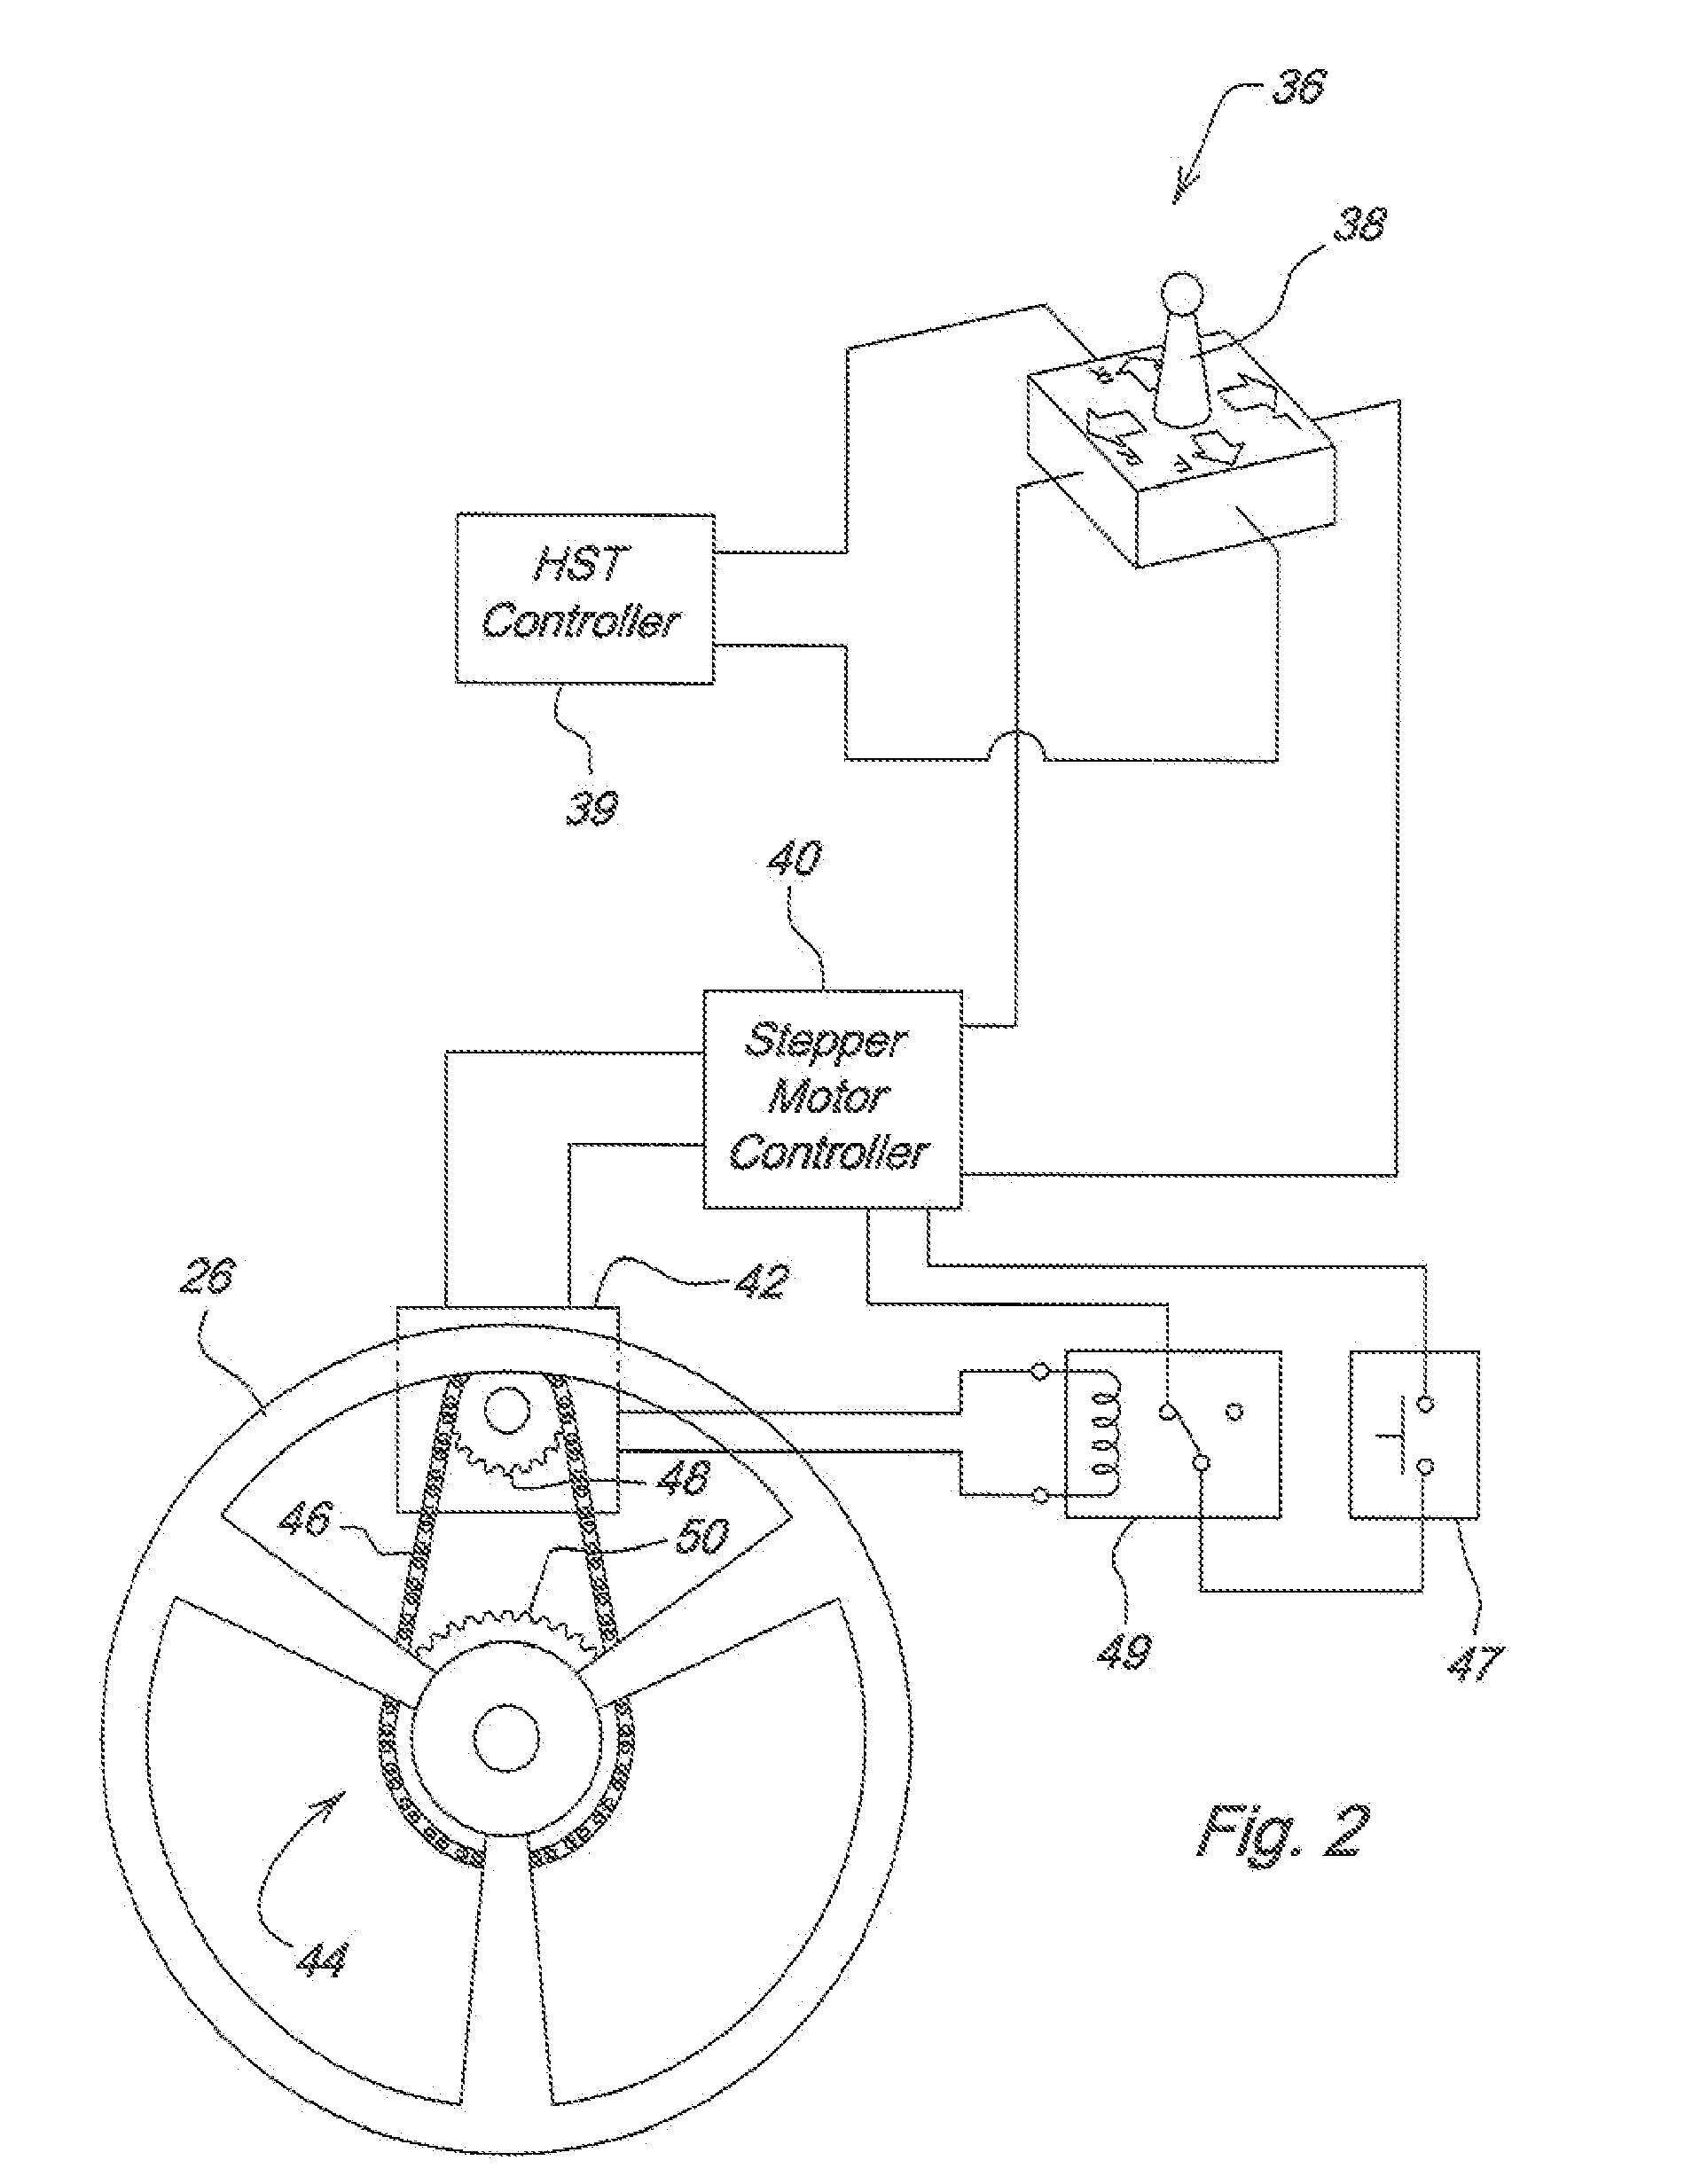 Creep Steering Control System Operable From Rearward-Facing Position